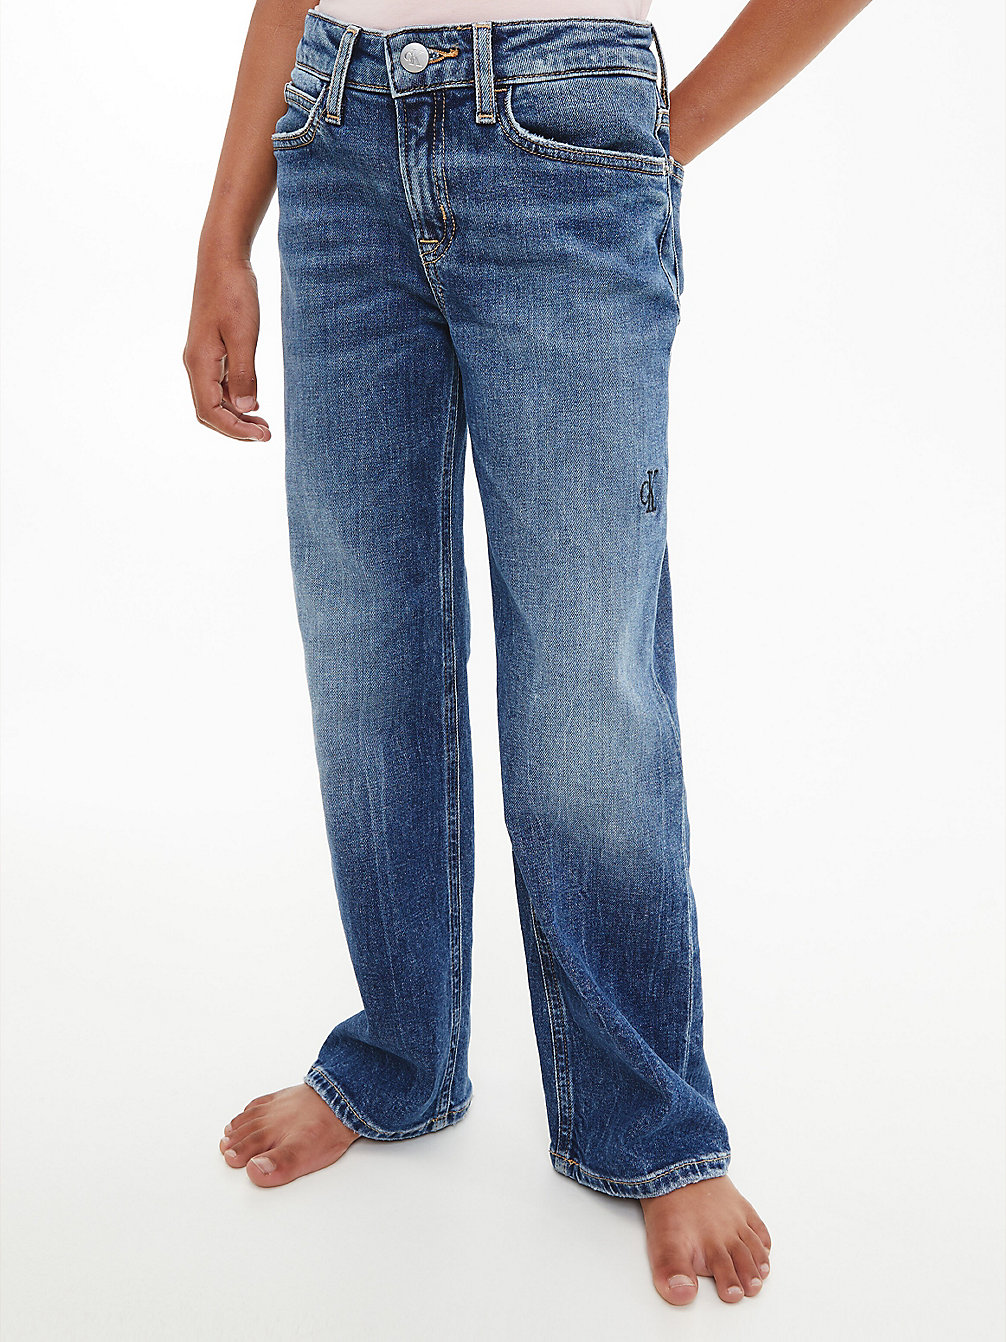 VISUAL MID BLUE High Rise Wide Leg Jeans undefined girls Calvin Klein